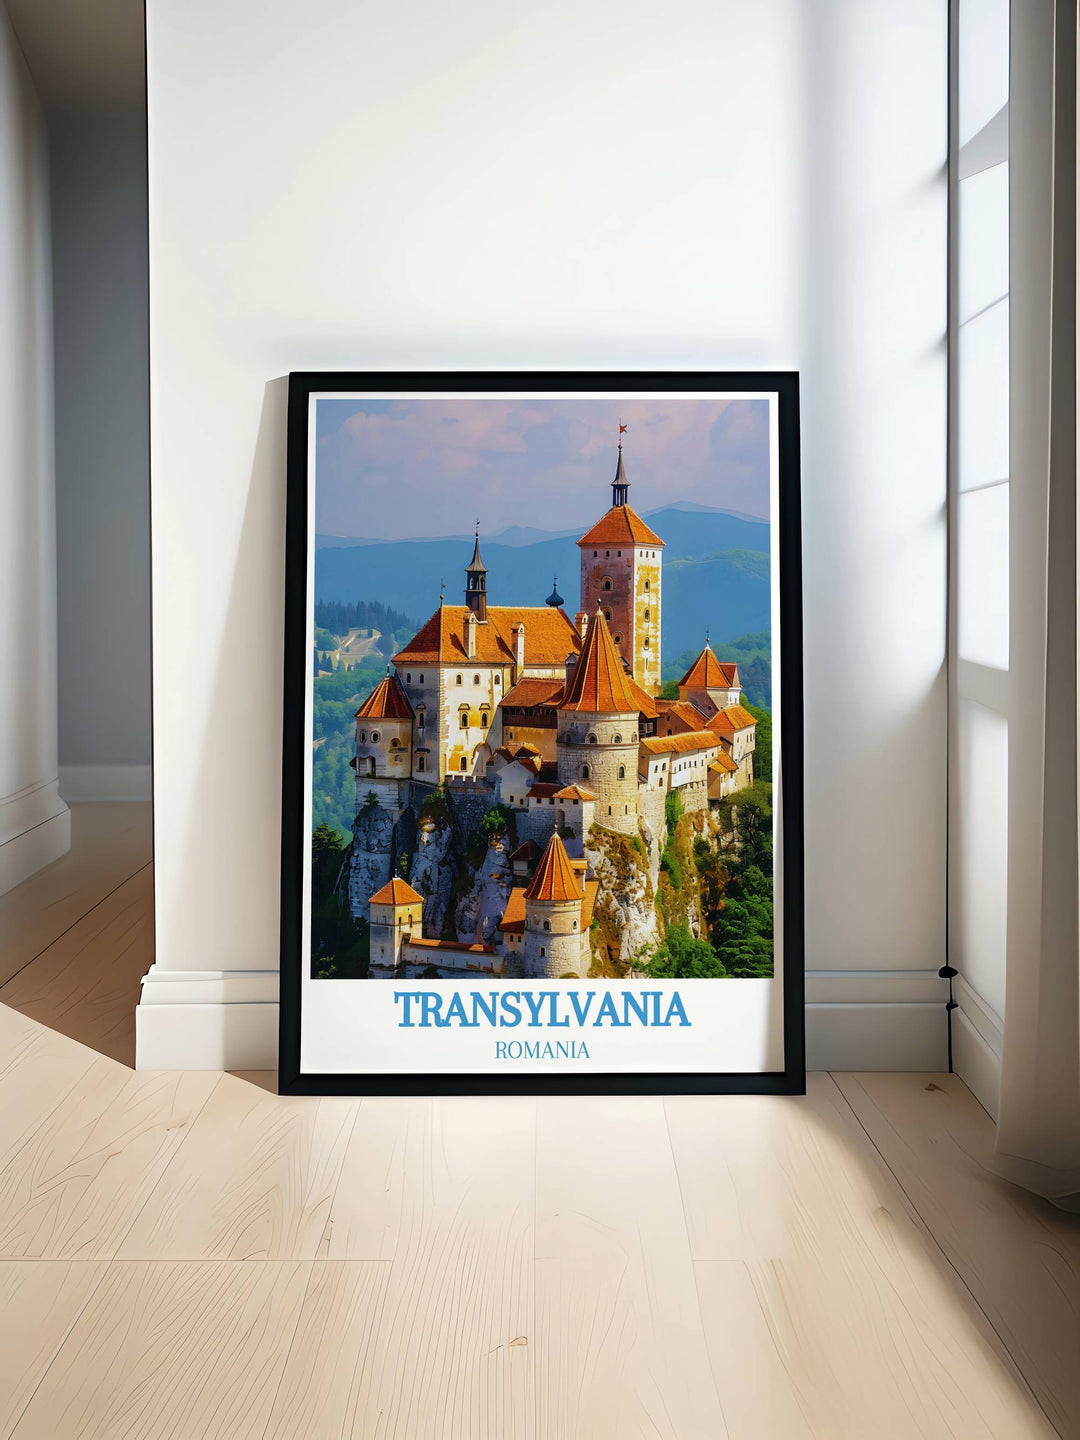 Transylvania fine art prints showcasing the intricate details and vivid colors of Bran Castle, capturing the castles imposing structure and picturesque surroundings, perfect for adding a touch of history and gothic allure to your art collection.